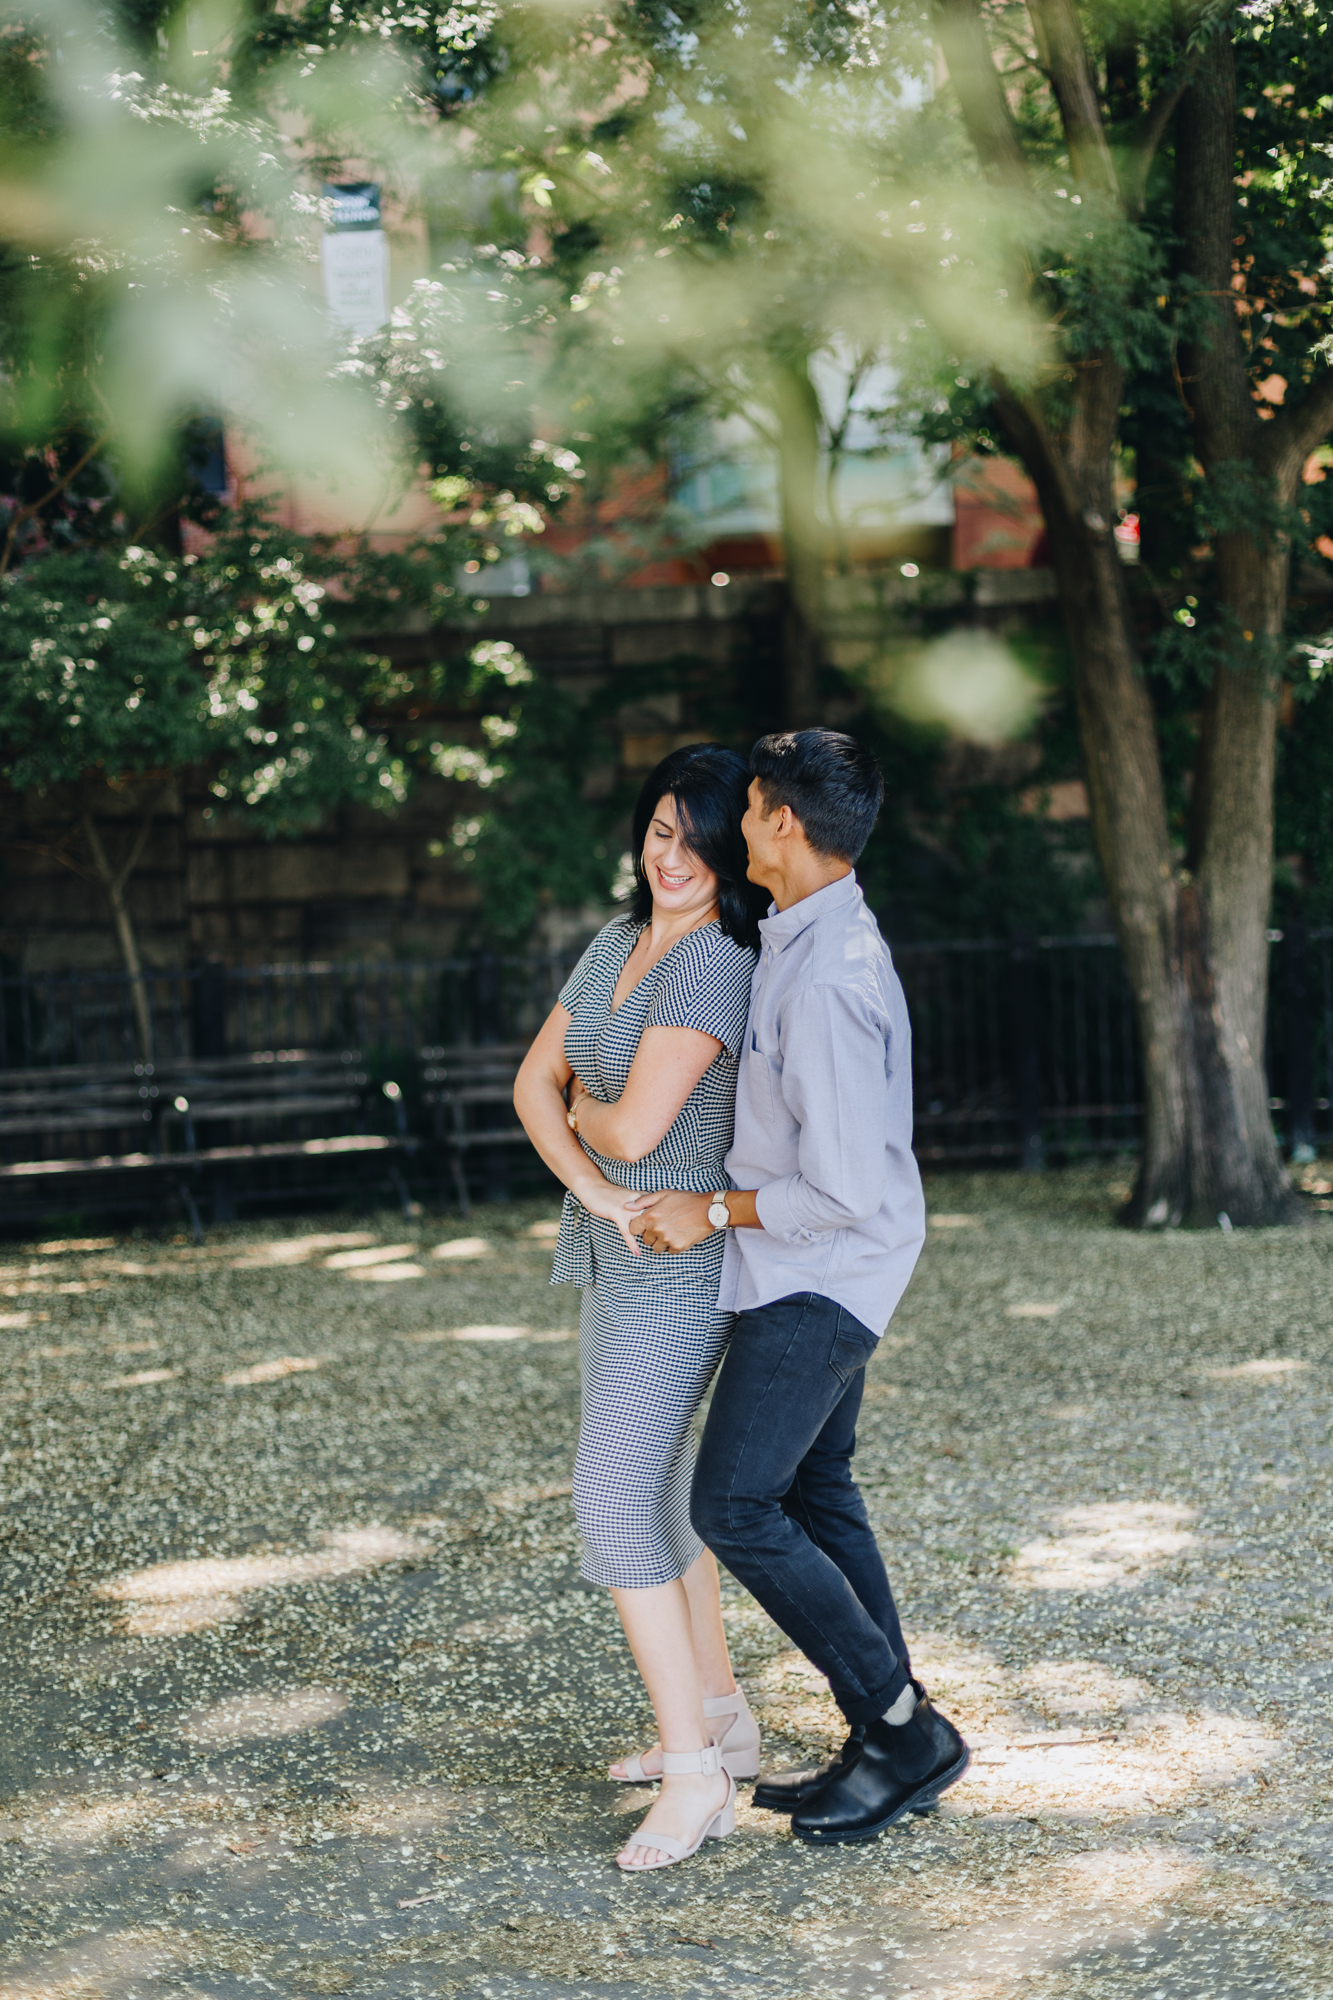 Amazing Pose Ideas for your Engagement Session